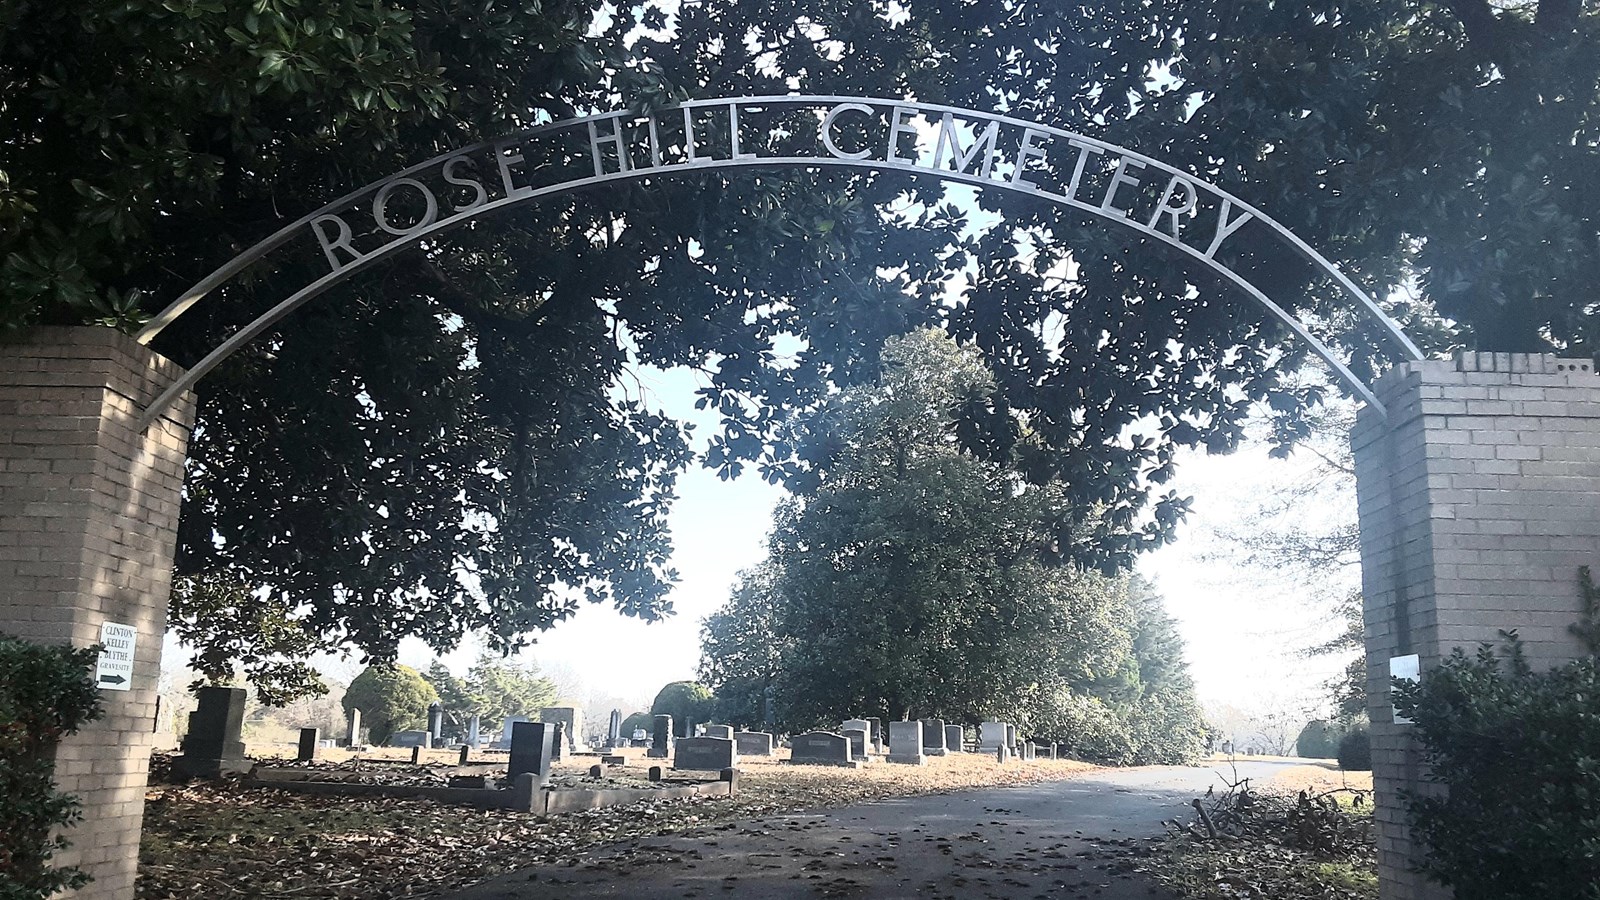 The entrance to Rose Hill Cemetery